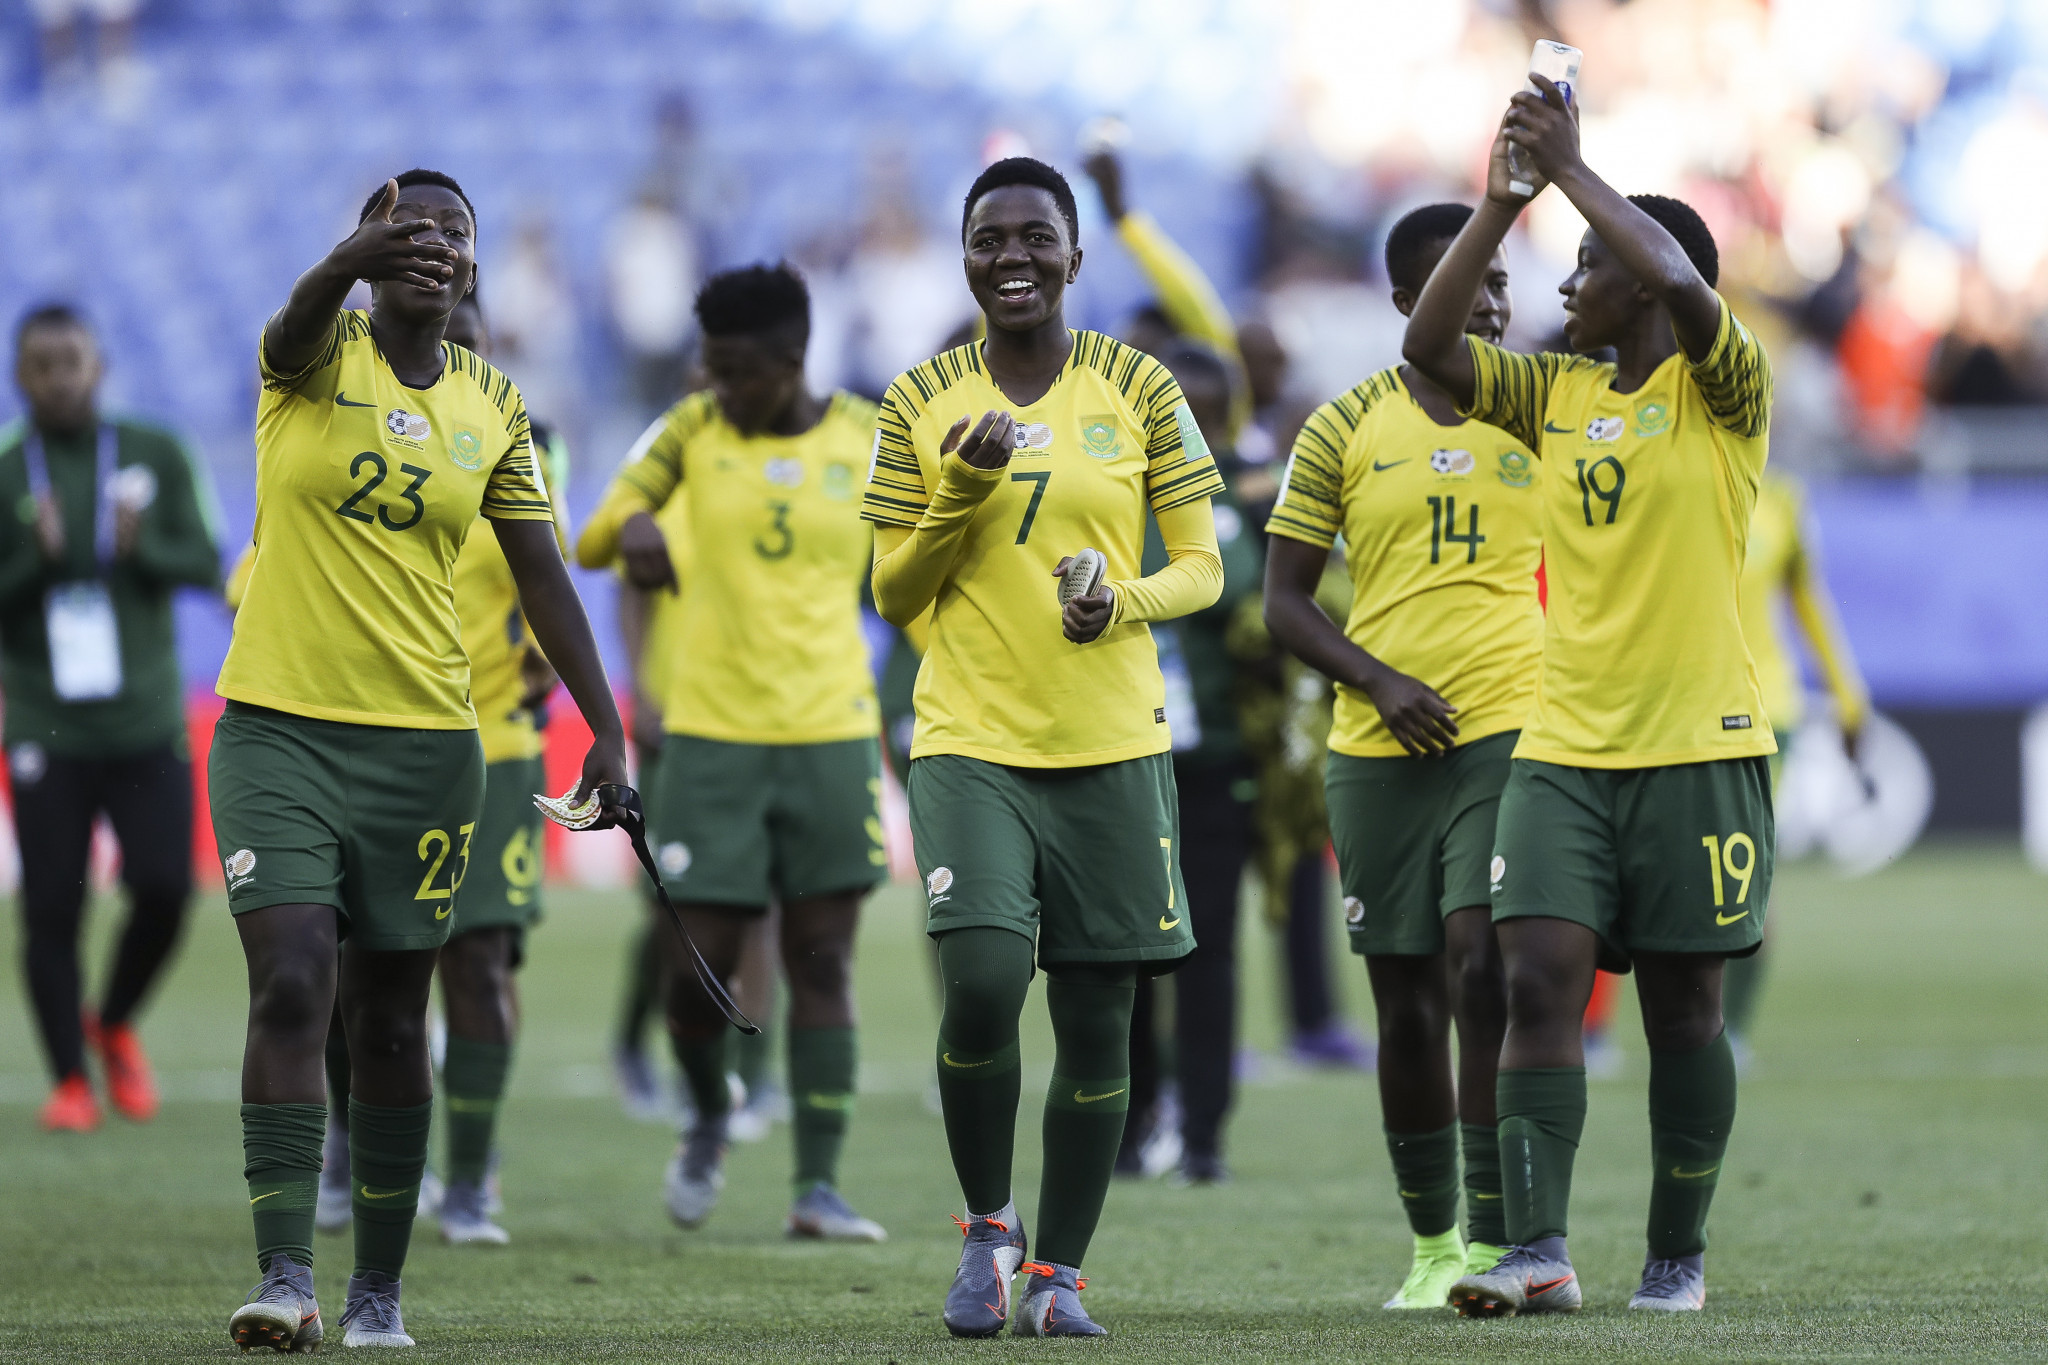 South Africa claimed a place in the quarter-finals of the Women's Africa Cup of Nations after a 3-1 win against Burundi ©Getty Images